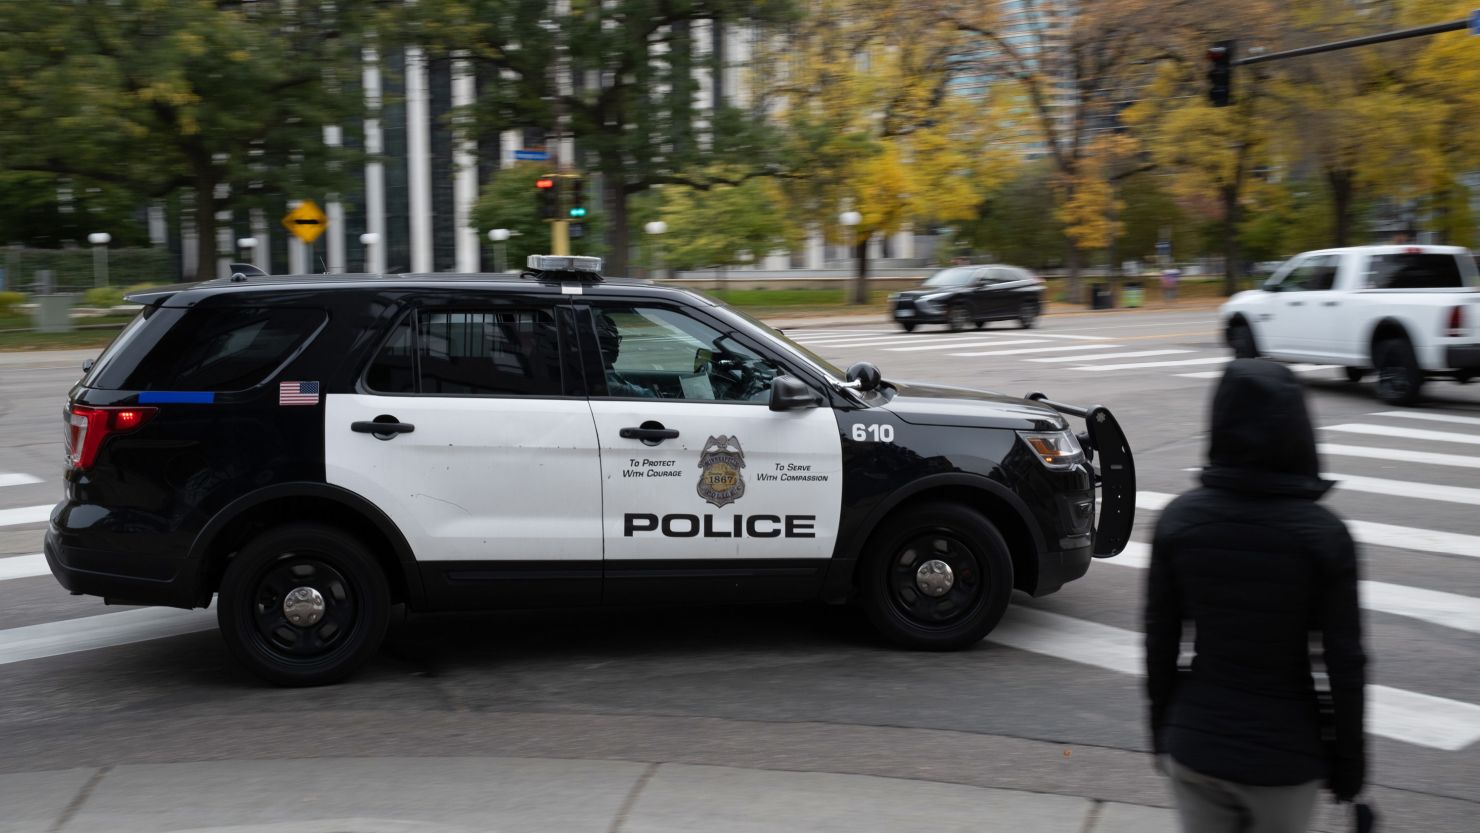 A police vehicle travels in downtown Minneapolis on Sunday, Oct. 24, 2021. More than a year after George Floyd was killed, voters in Minneapolis are about to decide on a mayor, every member of the city council  and a measure to overhaul the police department.